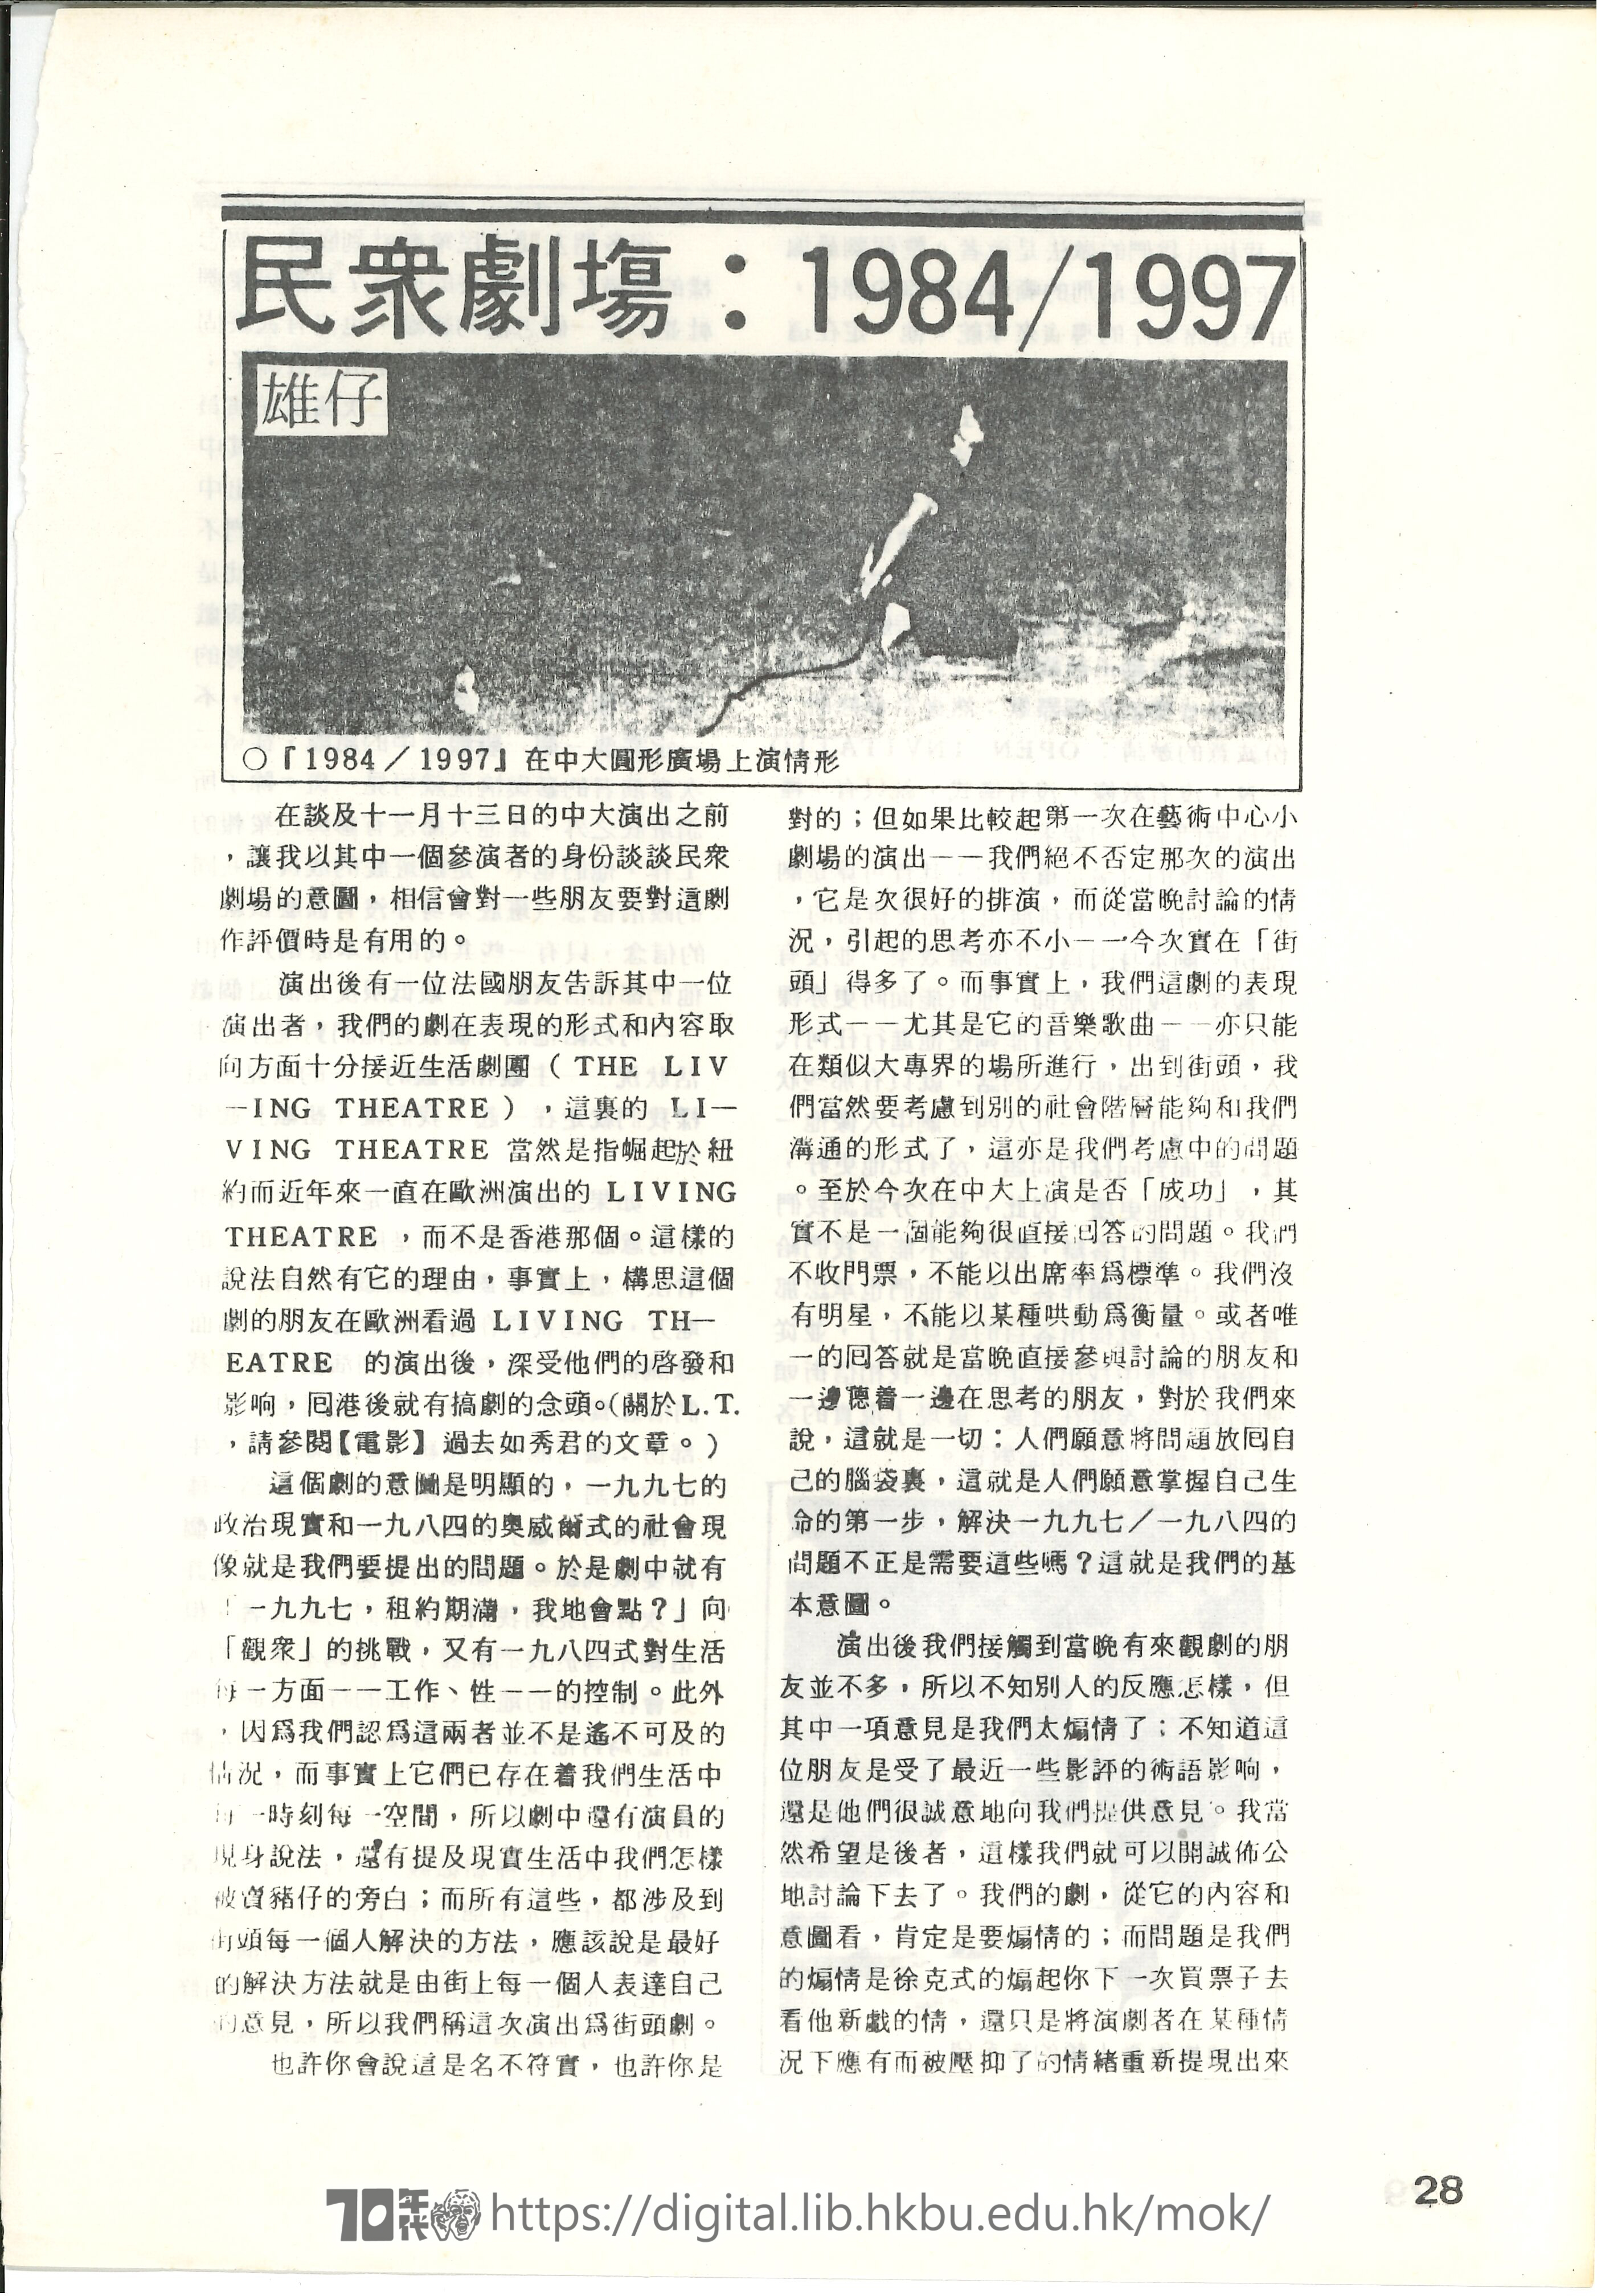   Special issue on street theatre 1984/1997  